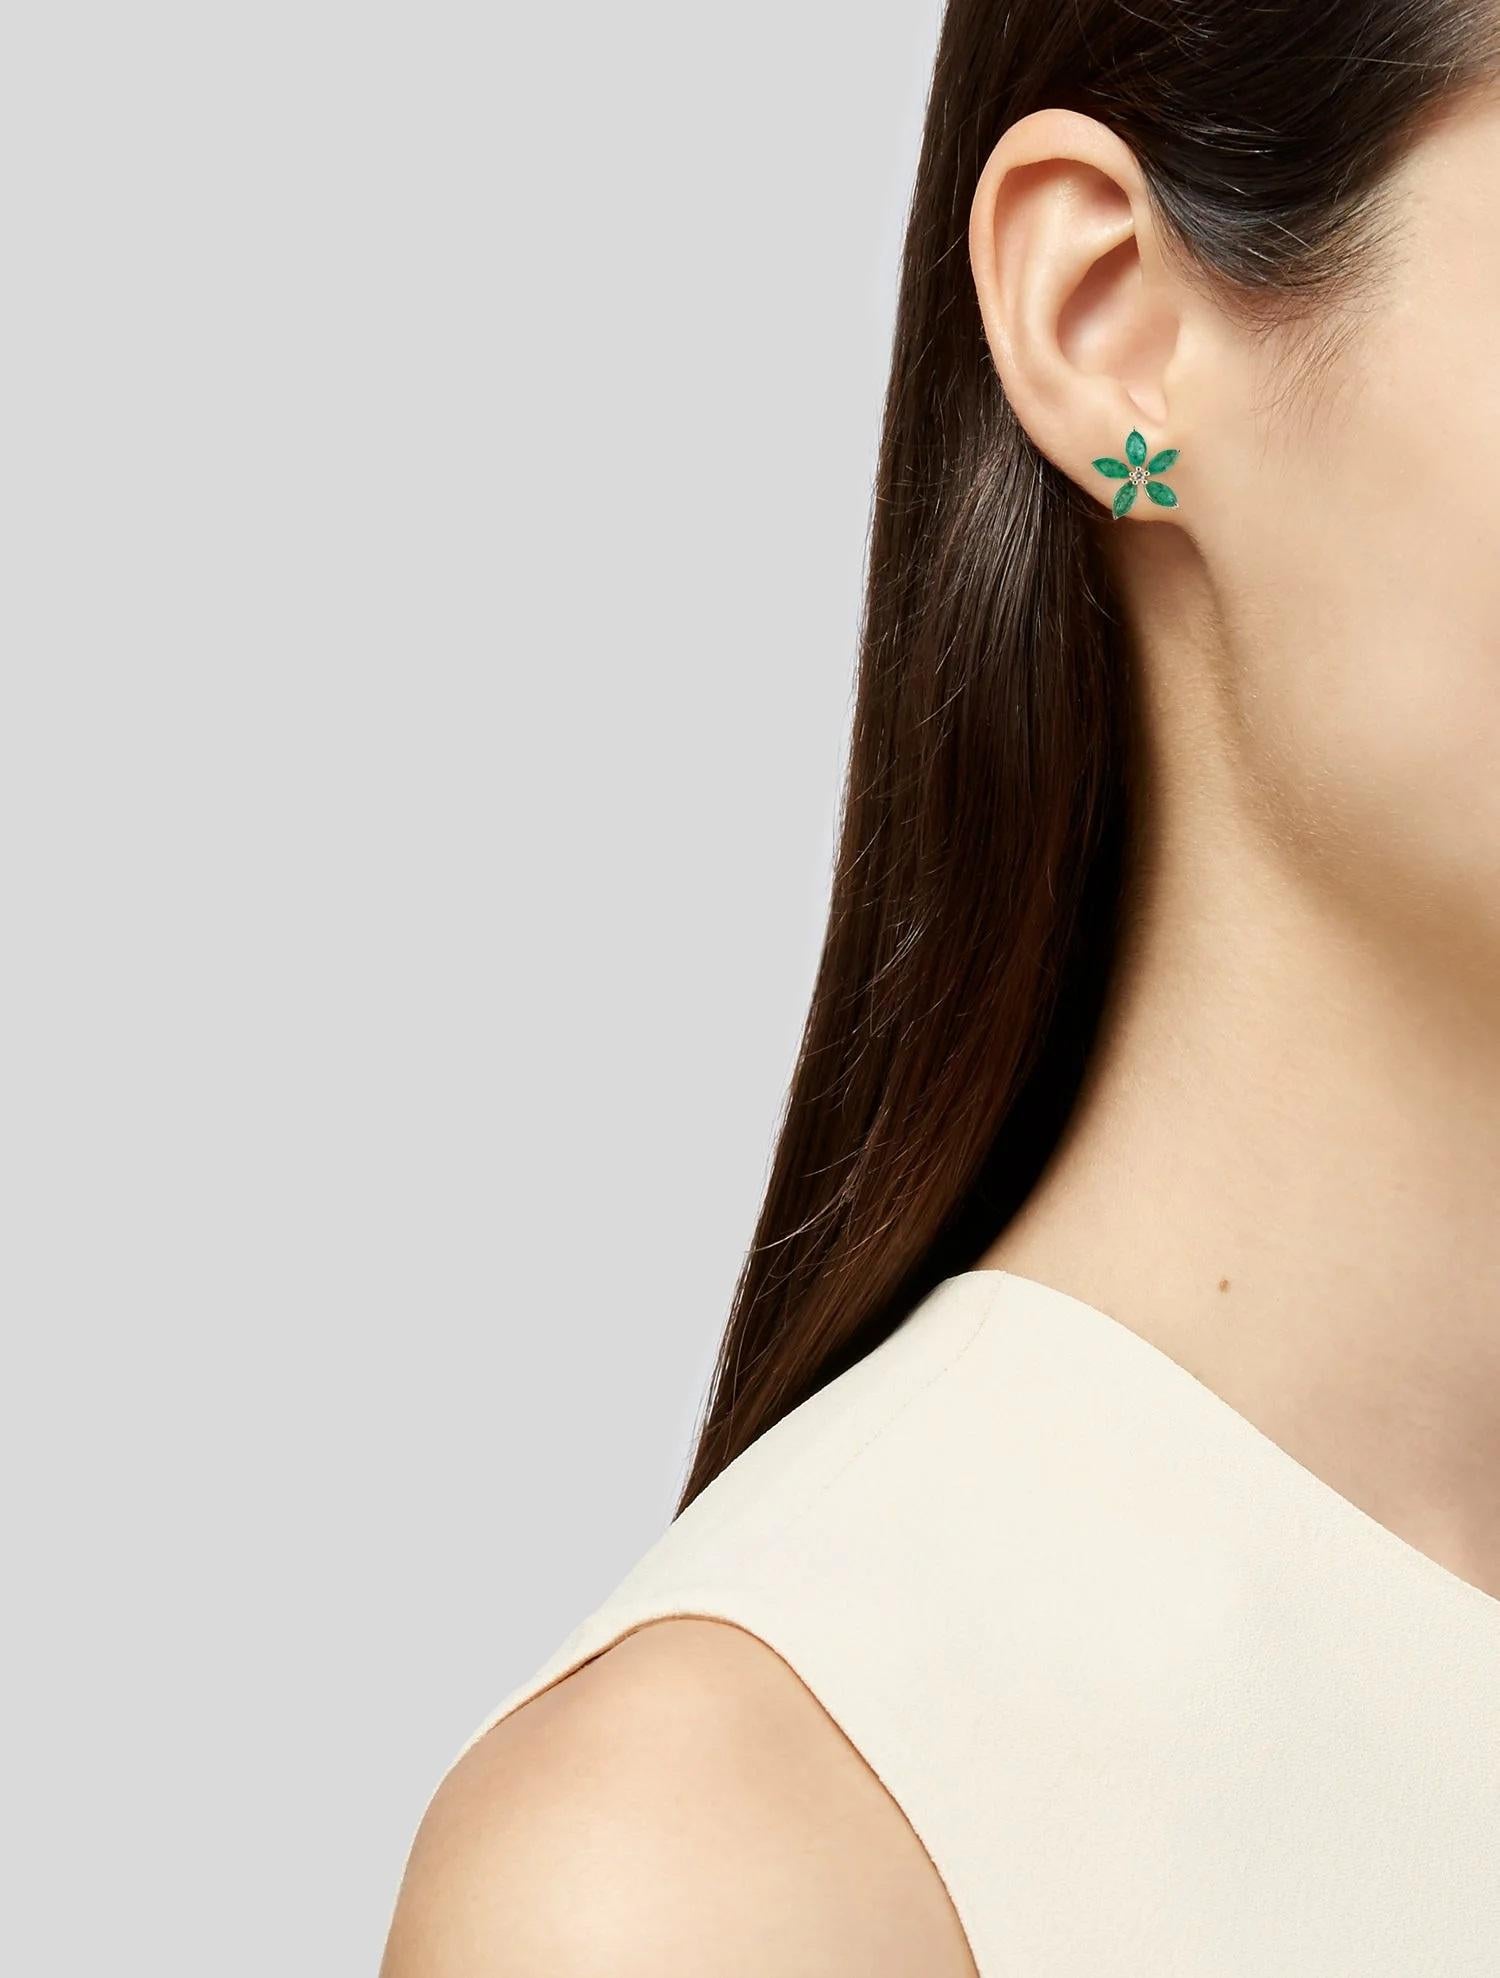 Unveil the beauty of refinement with these stunning 14K yellow gold earrings, featuring an exquisite assembly of 1.83 carats of marquise modified brilliant emeralds complemented by the subtle sparkle of near colorless diamonds. These earrings